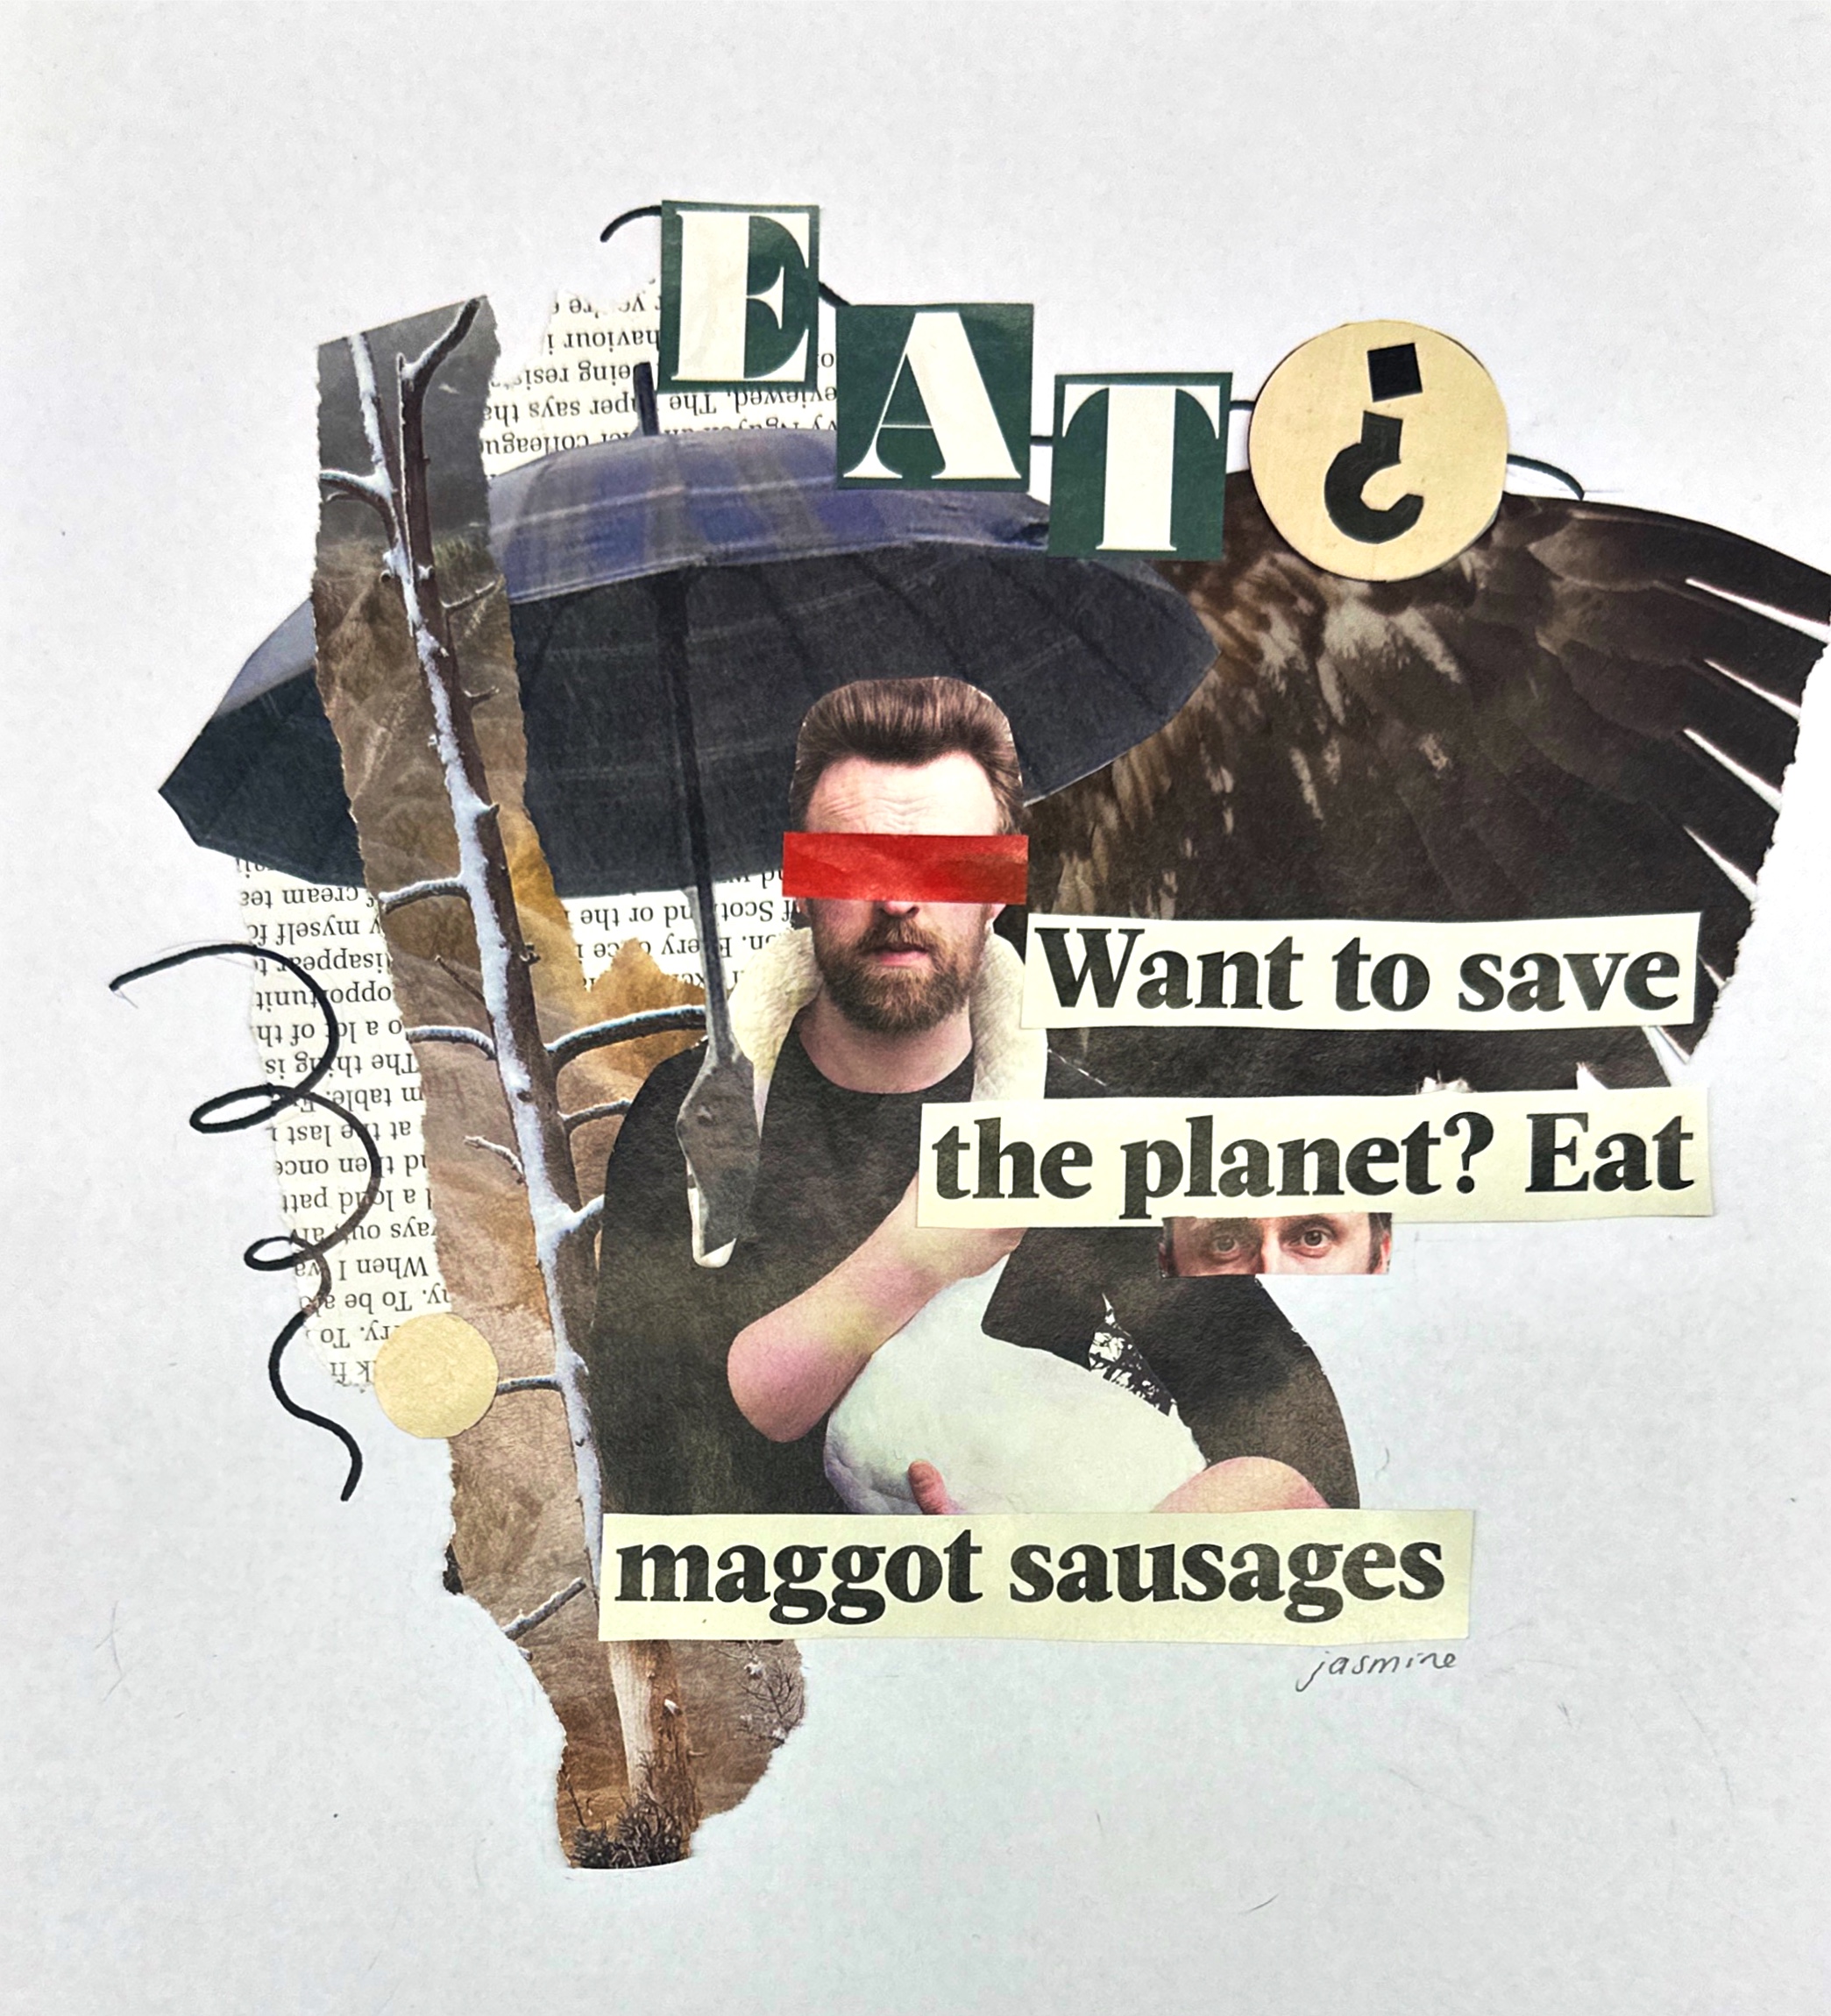 Maggot Sausages? - A Critique of Our Relationship with the Climate